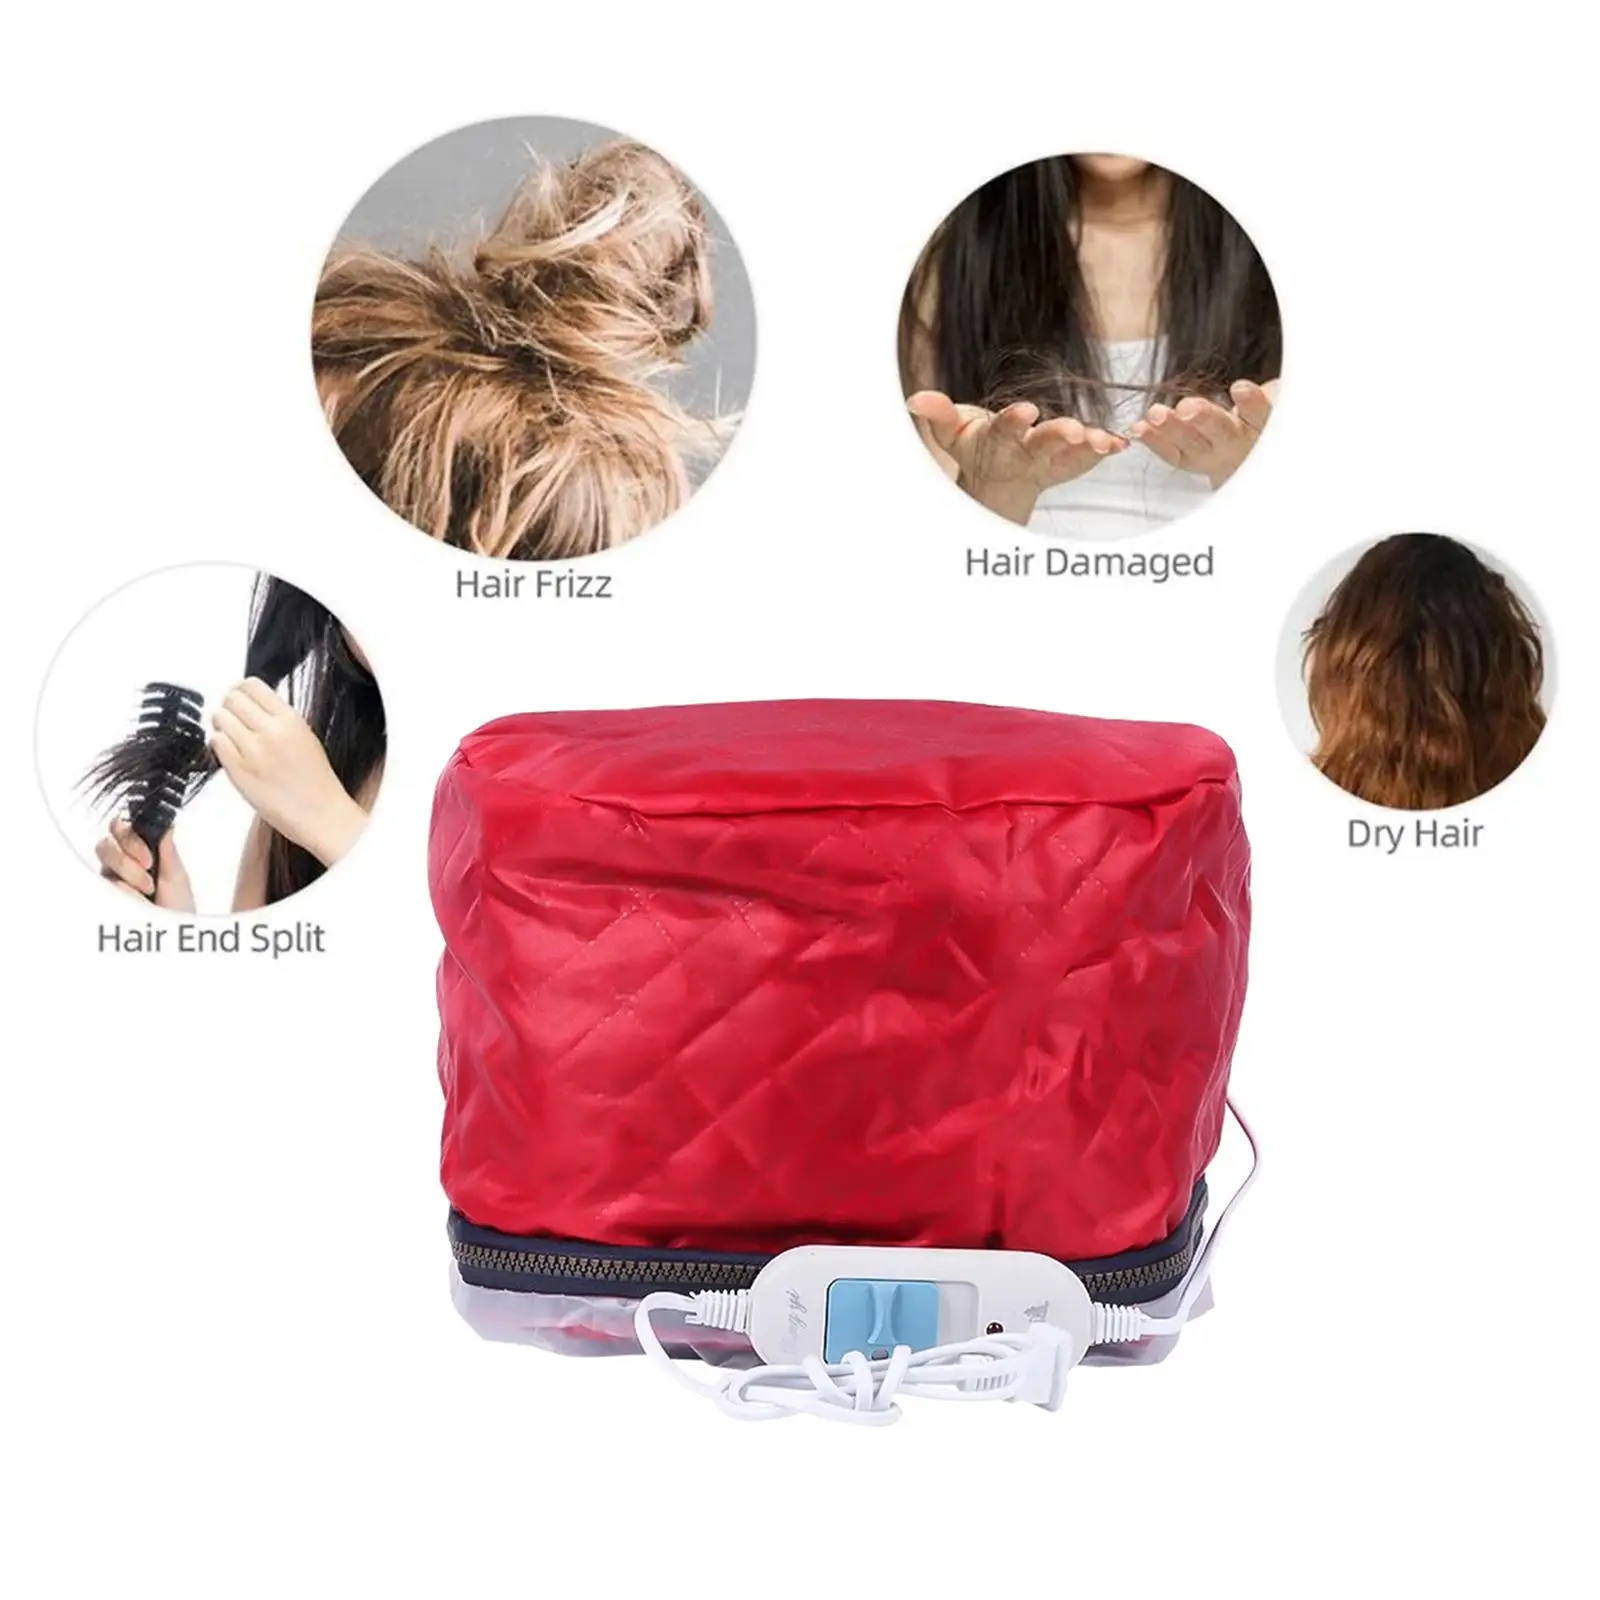 Hair Heating Caps Steamer 3-Modes Safe with Zipper Microwave Hot Caps for Deep Conditioning Salon Hot Head Care Hair SPA Travel